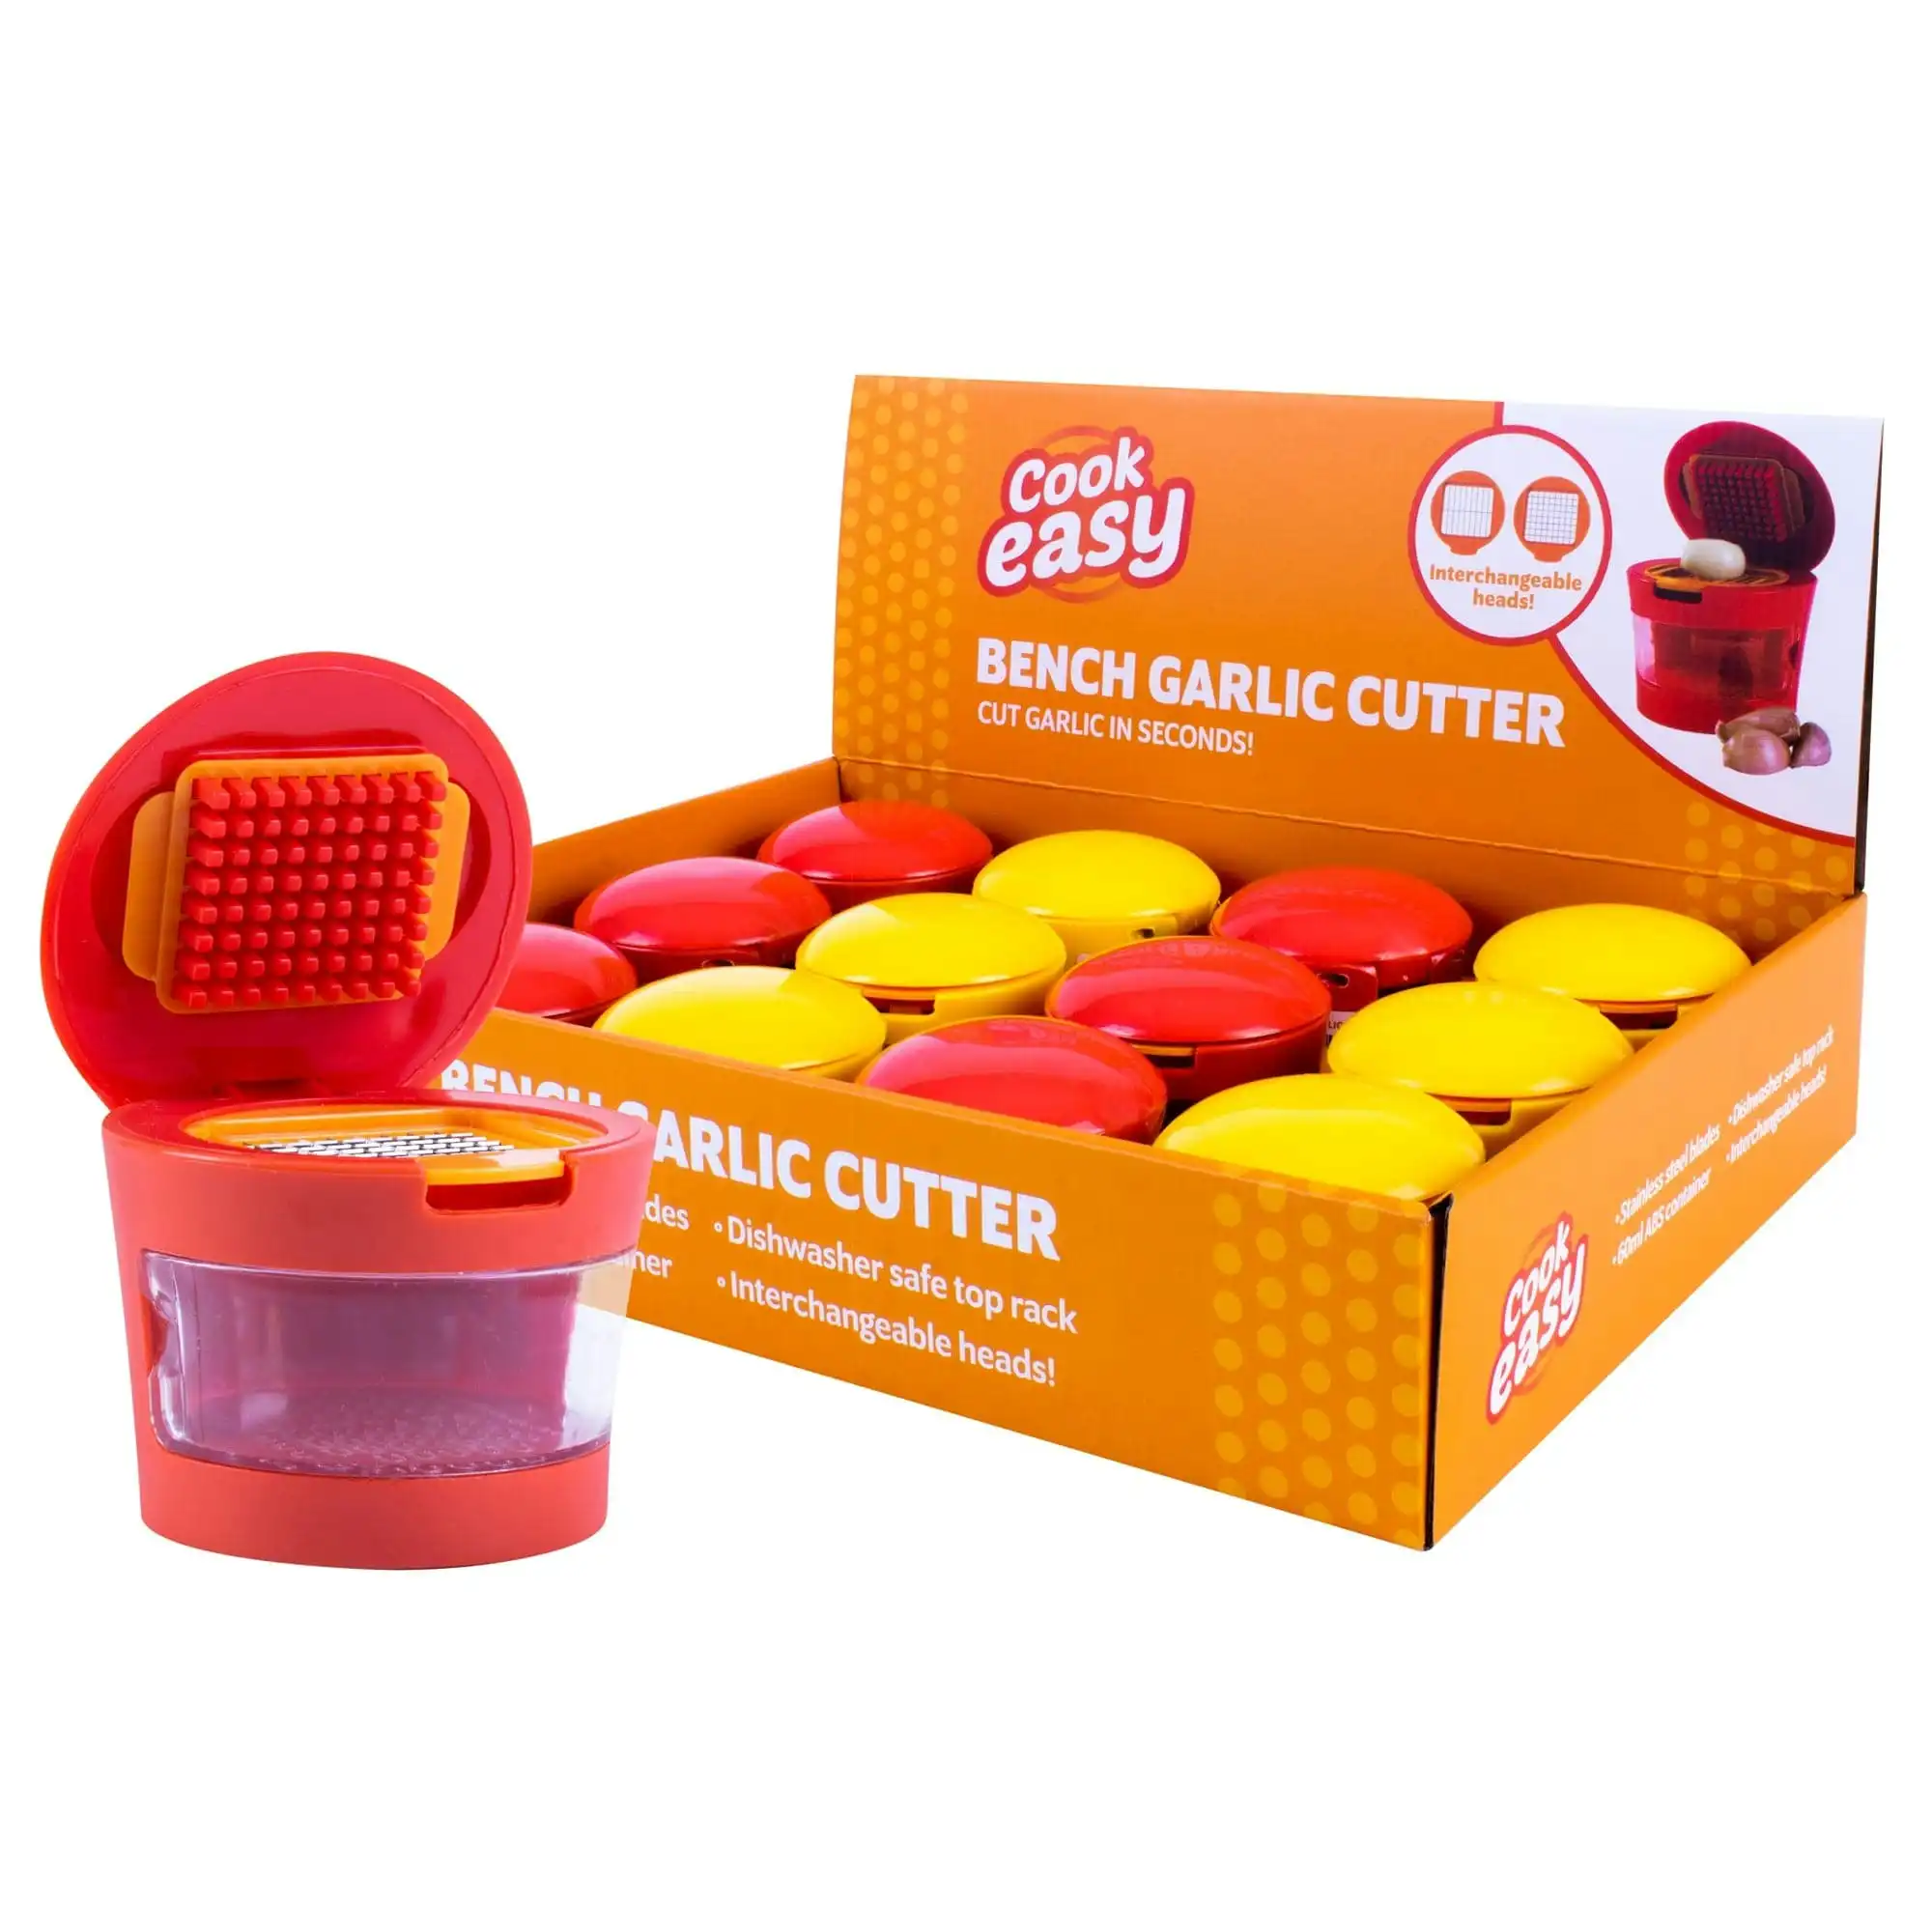 2 Bench Garlic Cutter in Assorted Color